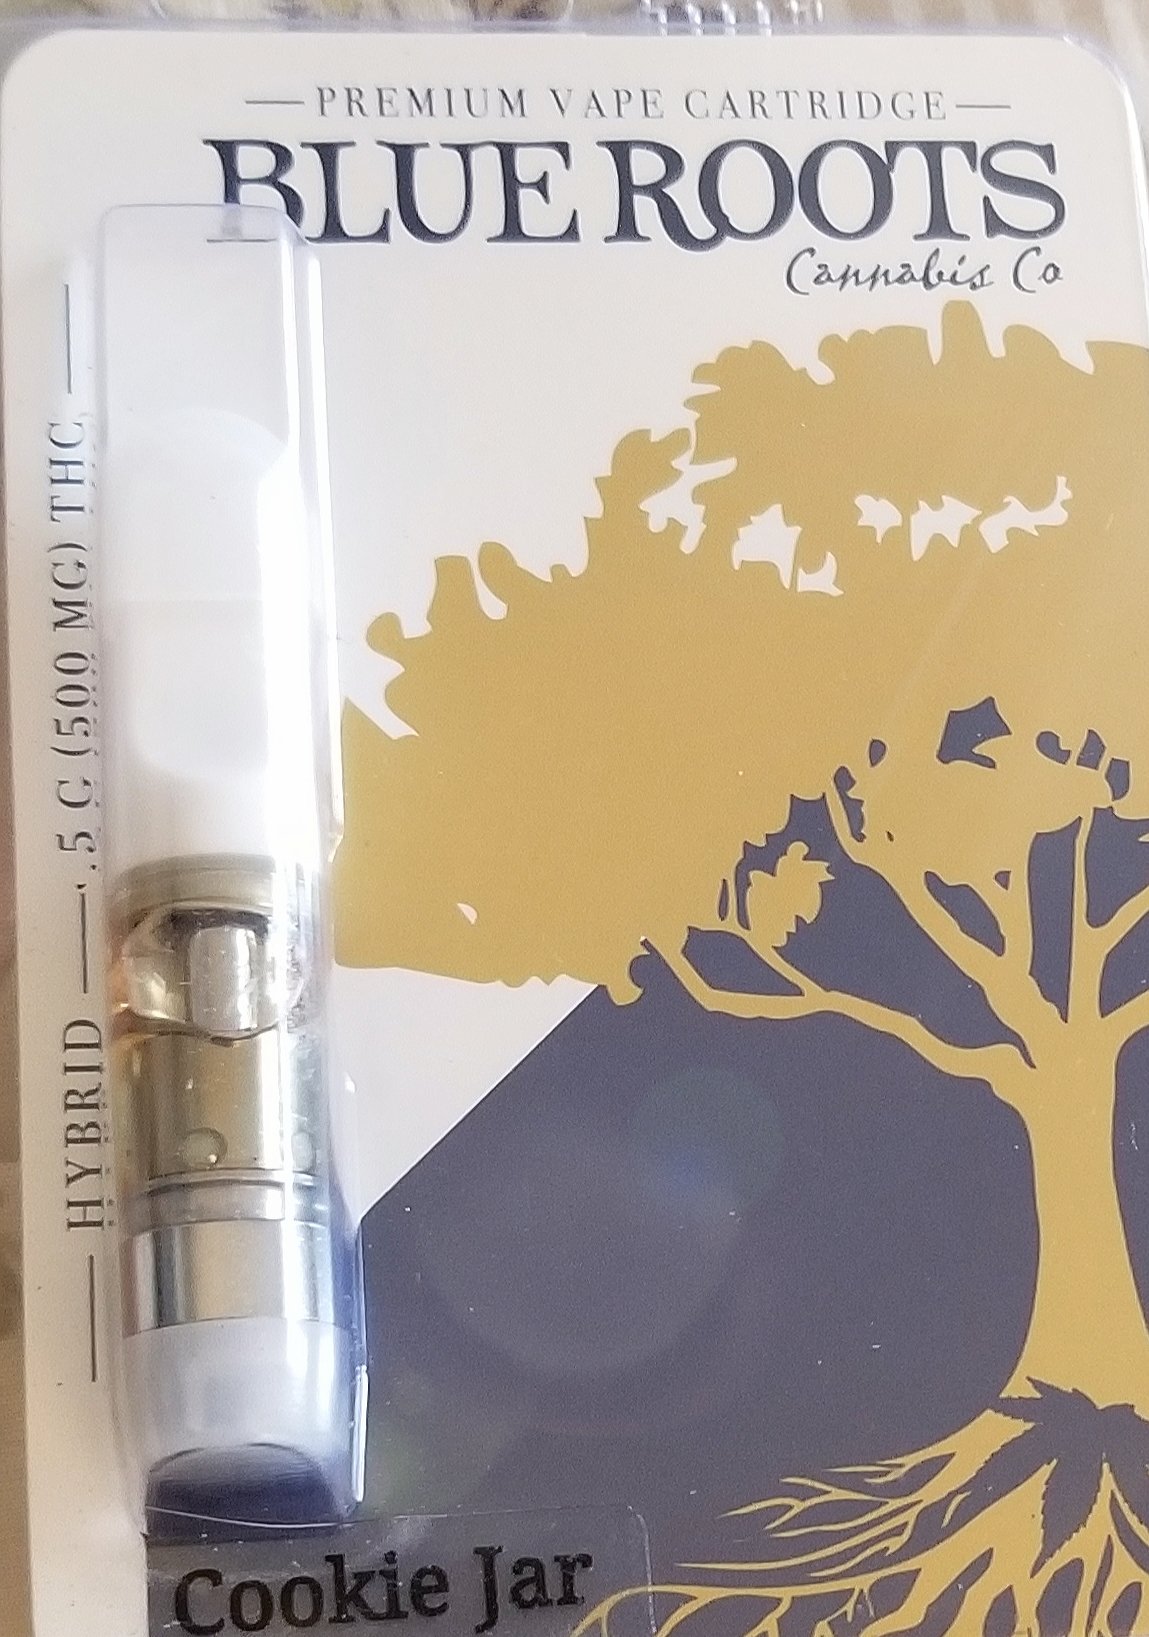 blue roots cannabis products, blue roots cannabis, cookie jar distillate